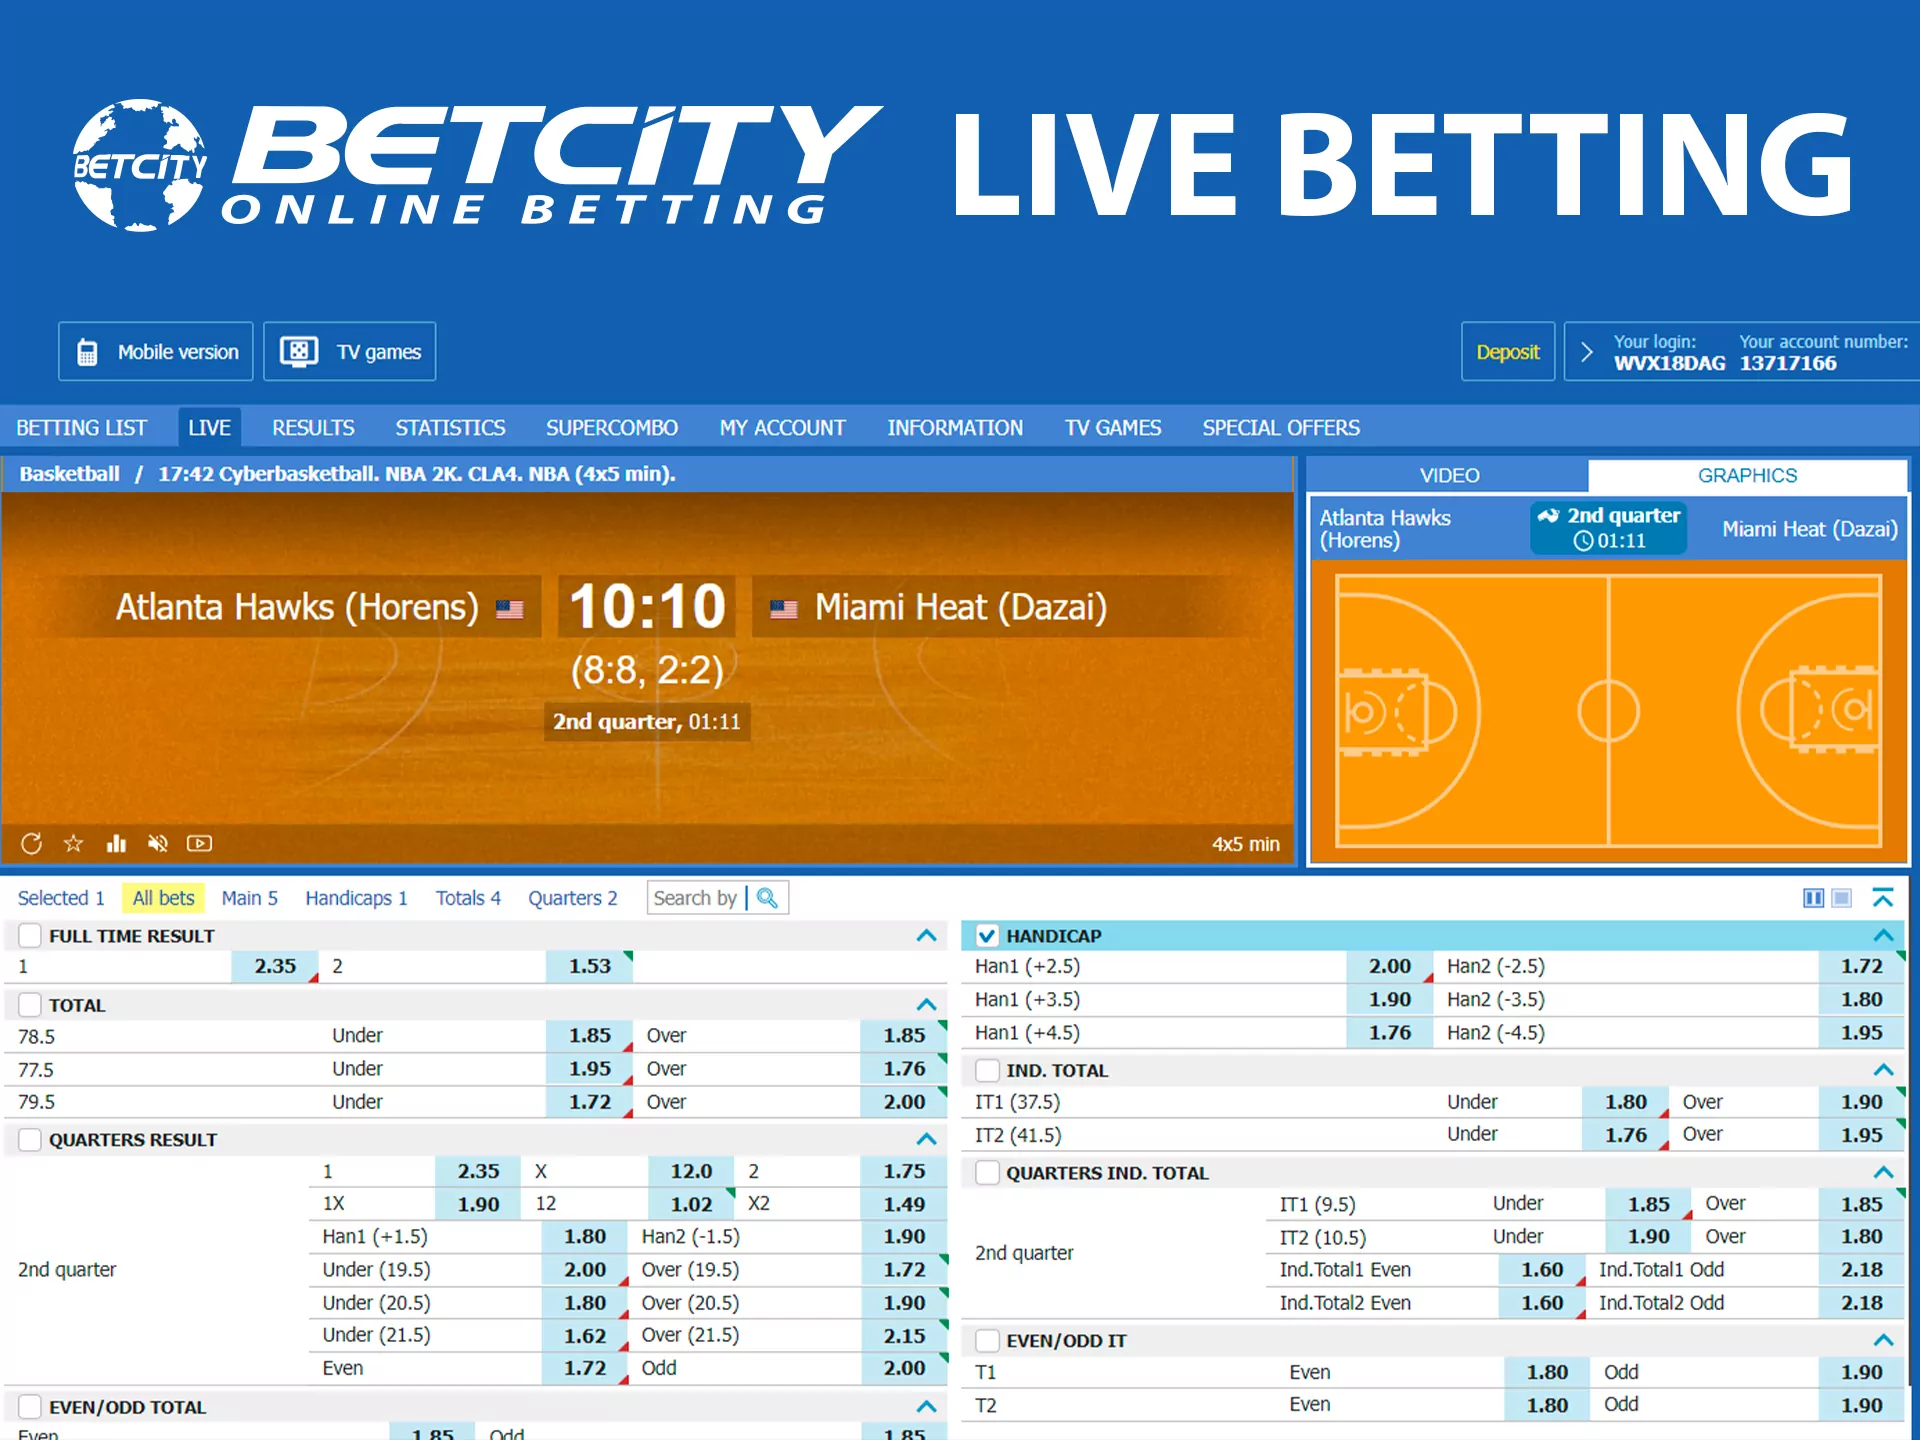 You can easily place live bets in the Betcity sportsbook.